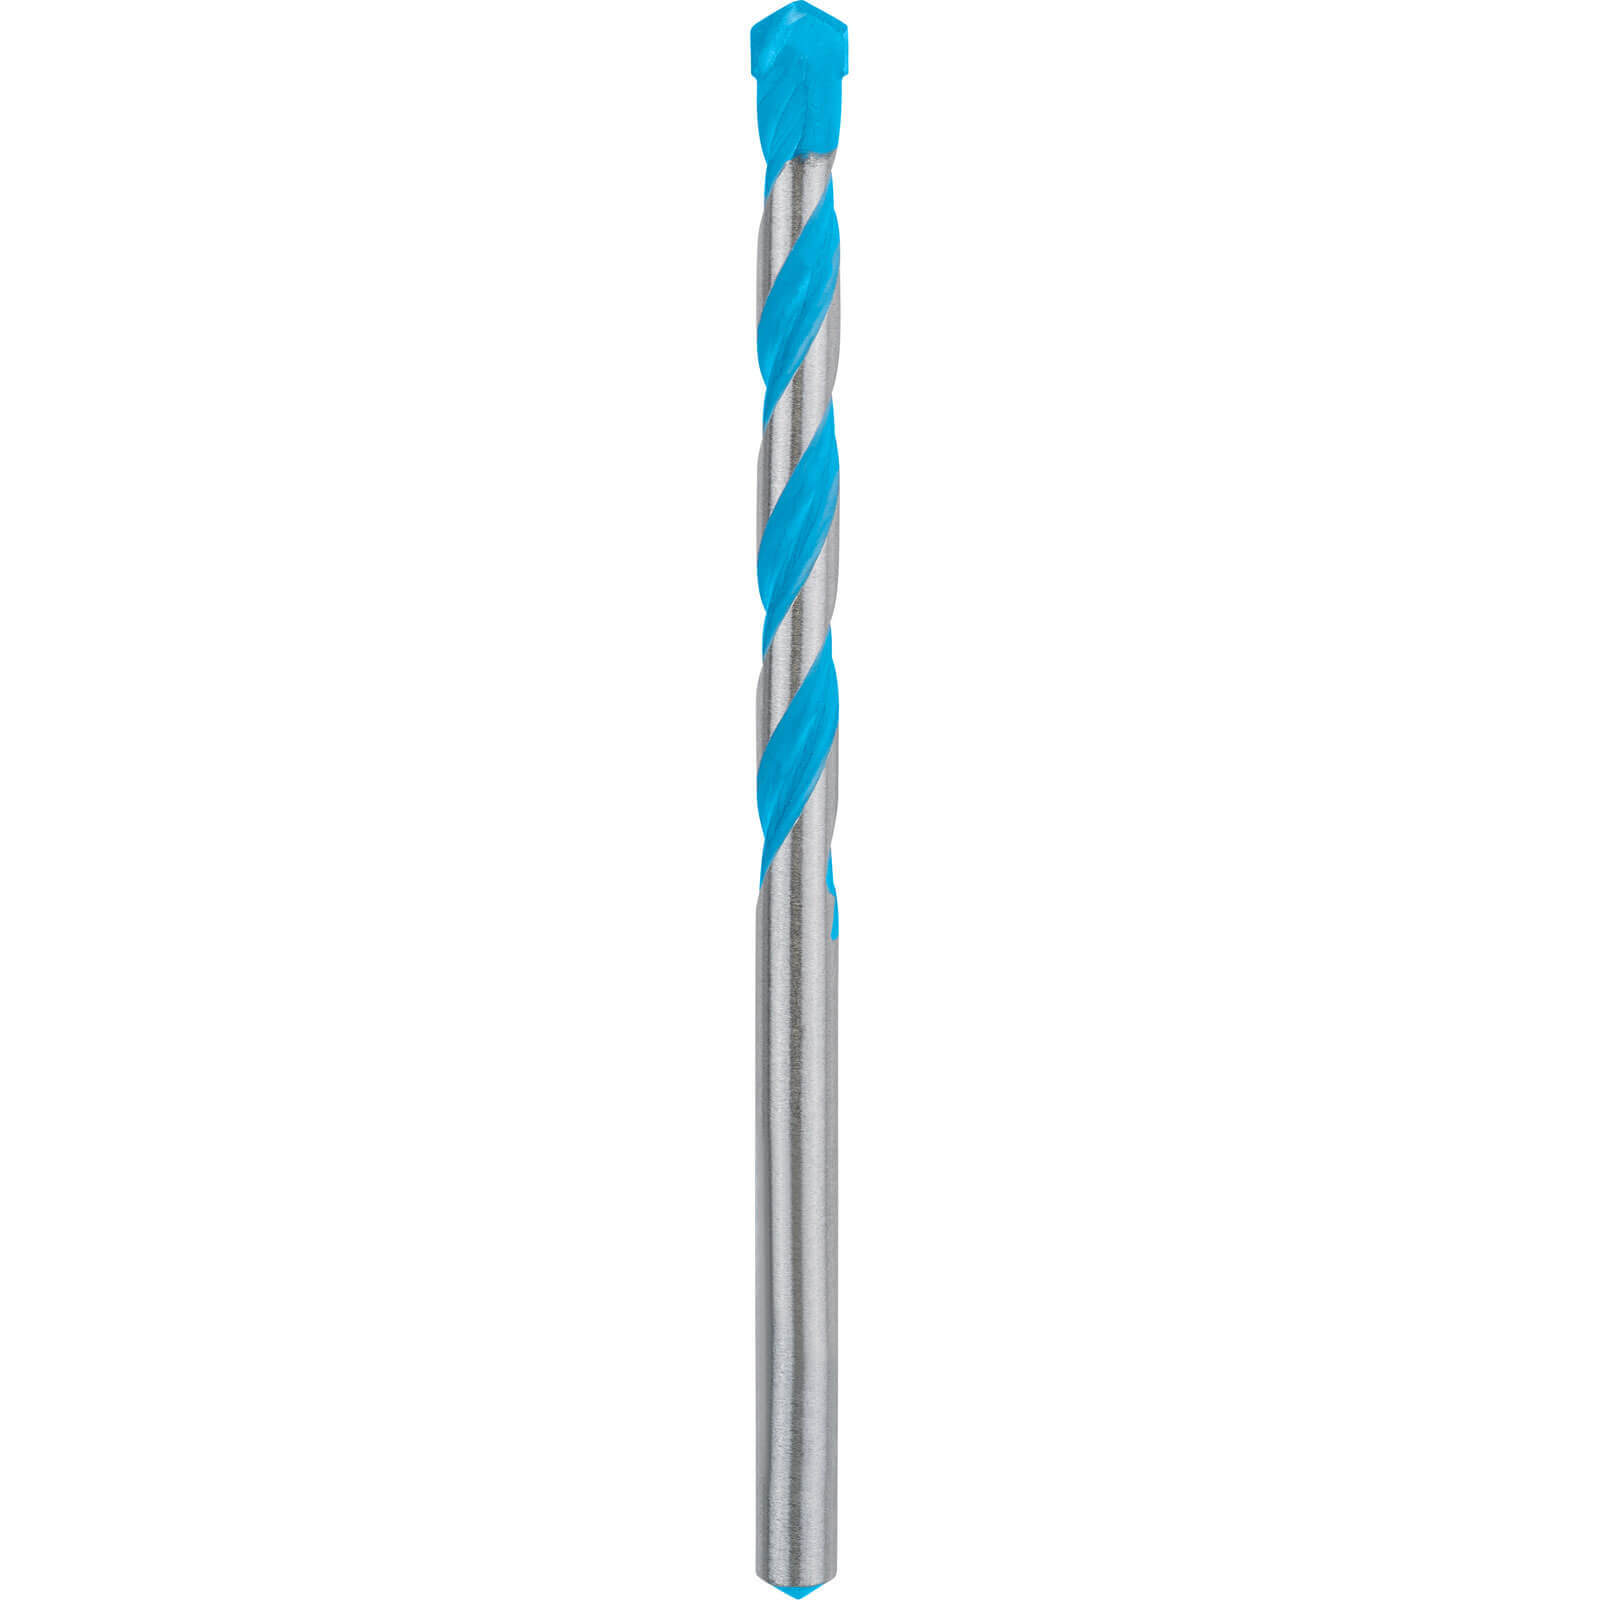 Image of Bosch Expert CYL-9 Multi Construction Drill Bit 5mm 85mm Pack of 1